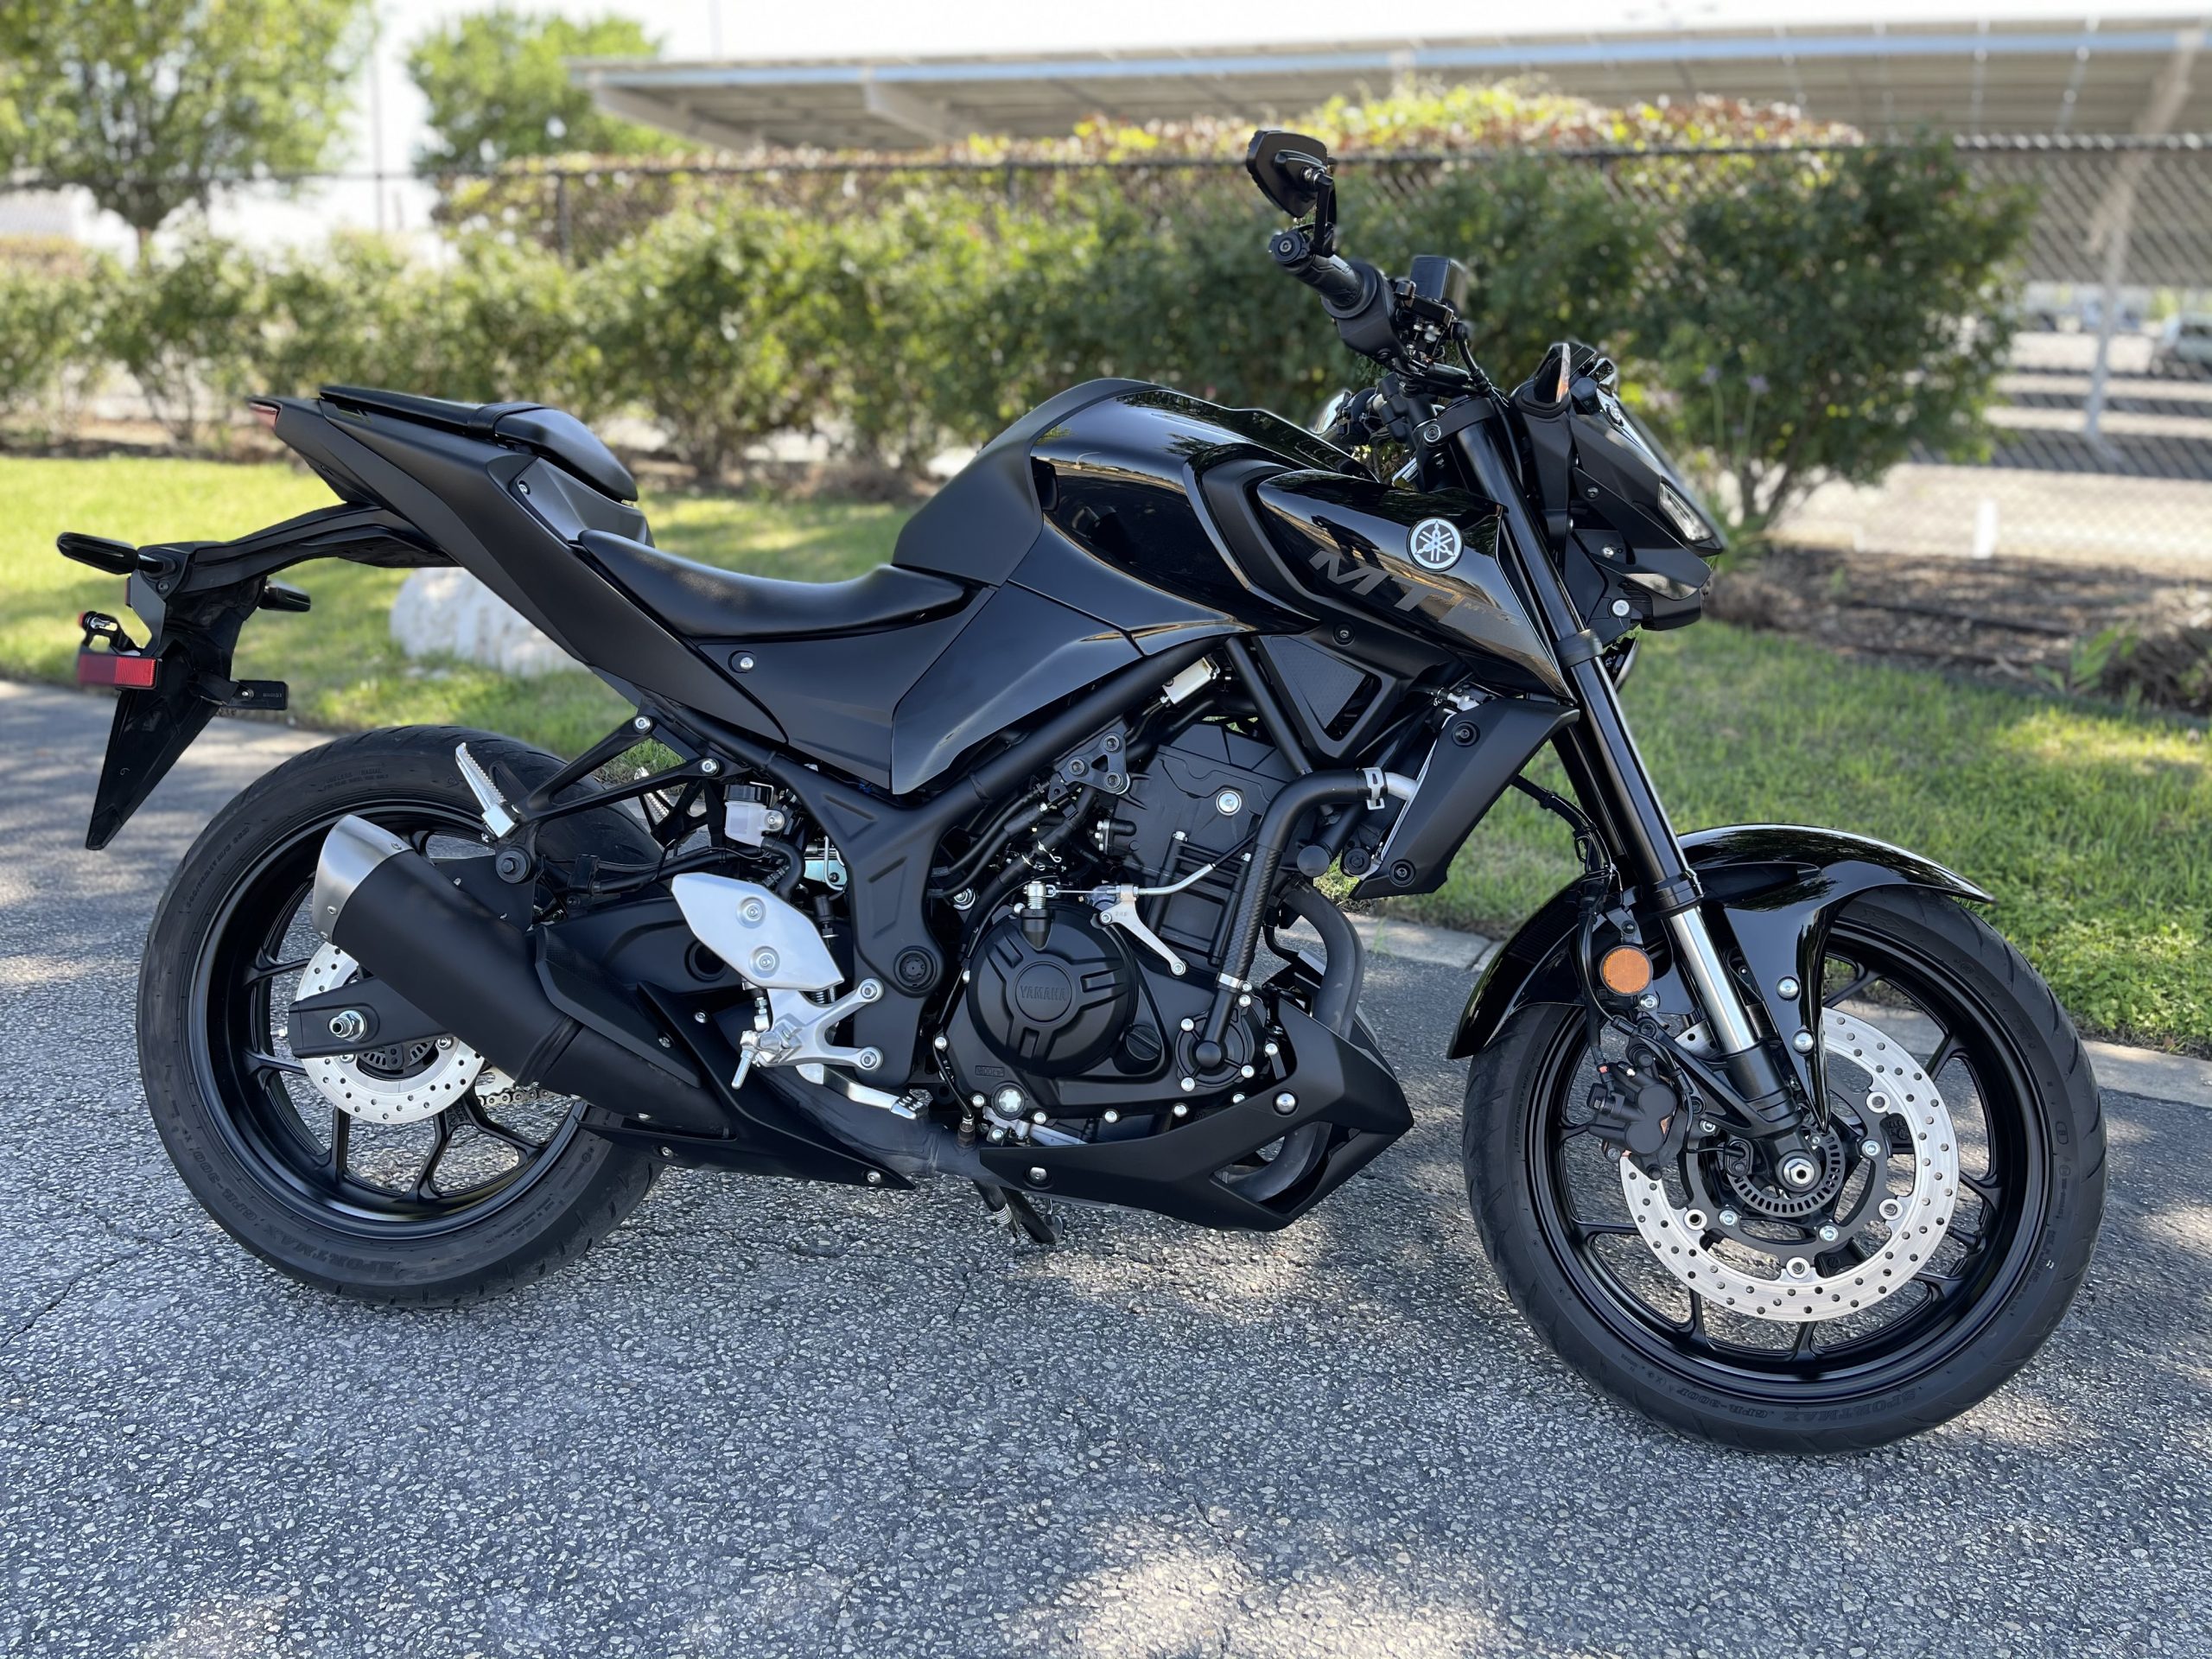 Like New, 2020 Yamaha MT-03 =SOLD= – The Motorcycle Shop